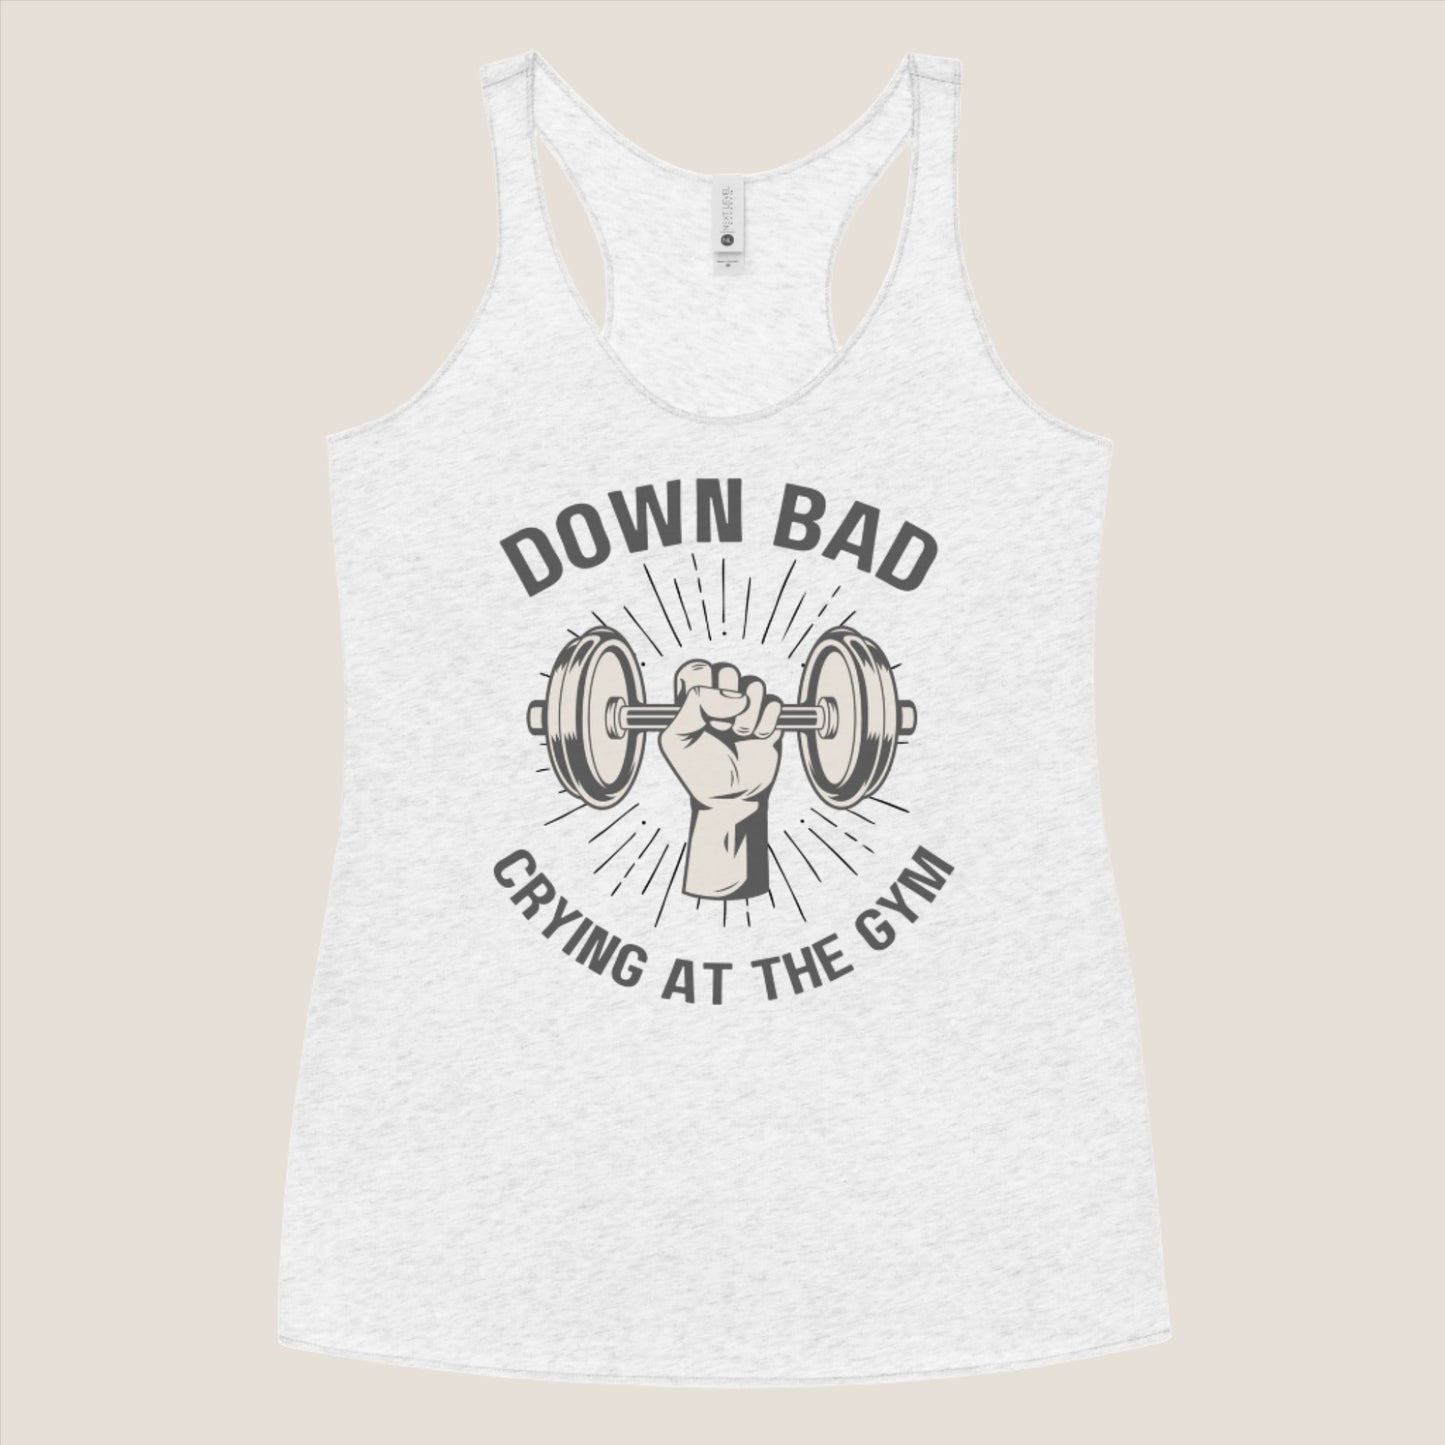 "Down Bad Crying at the Gym" Taylor Swift inspired Women's Racerback Tank // Delysia Designs